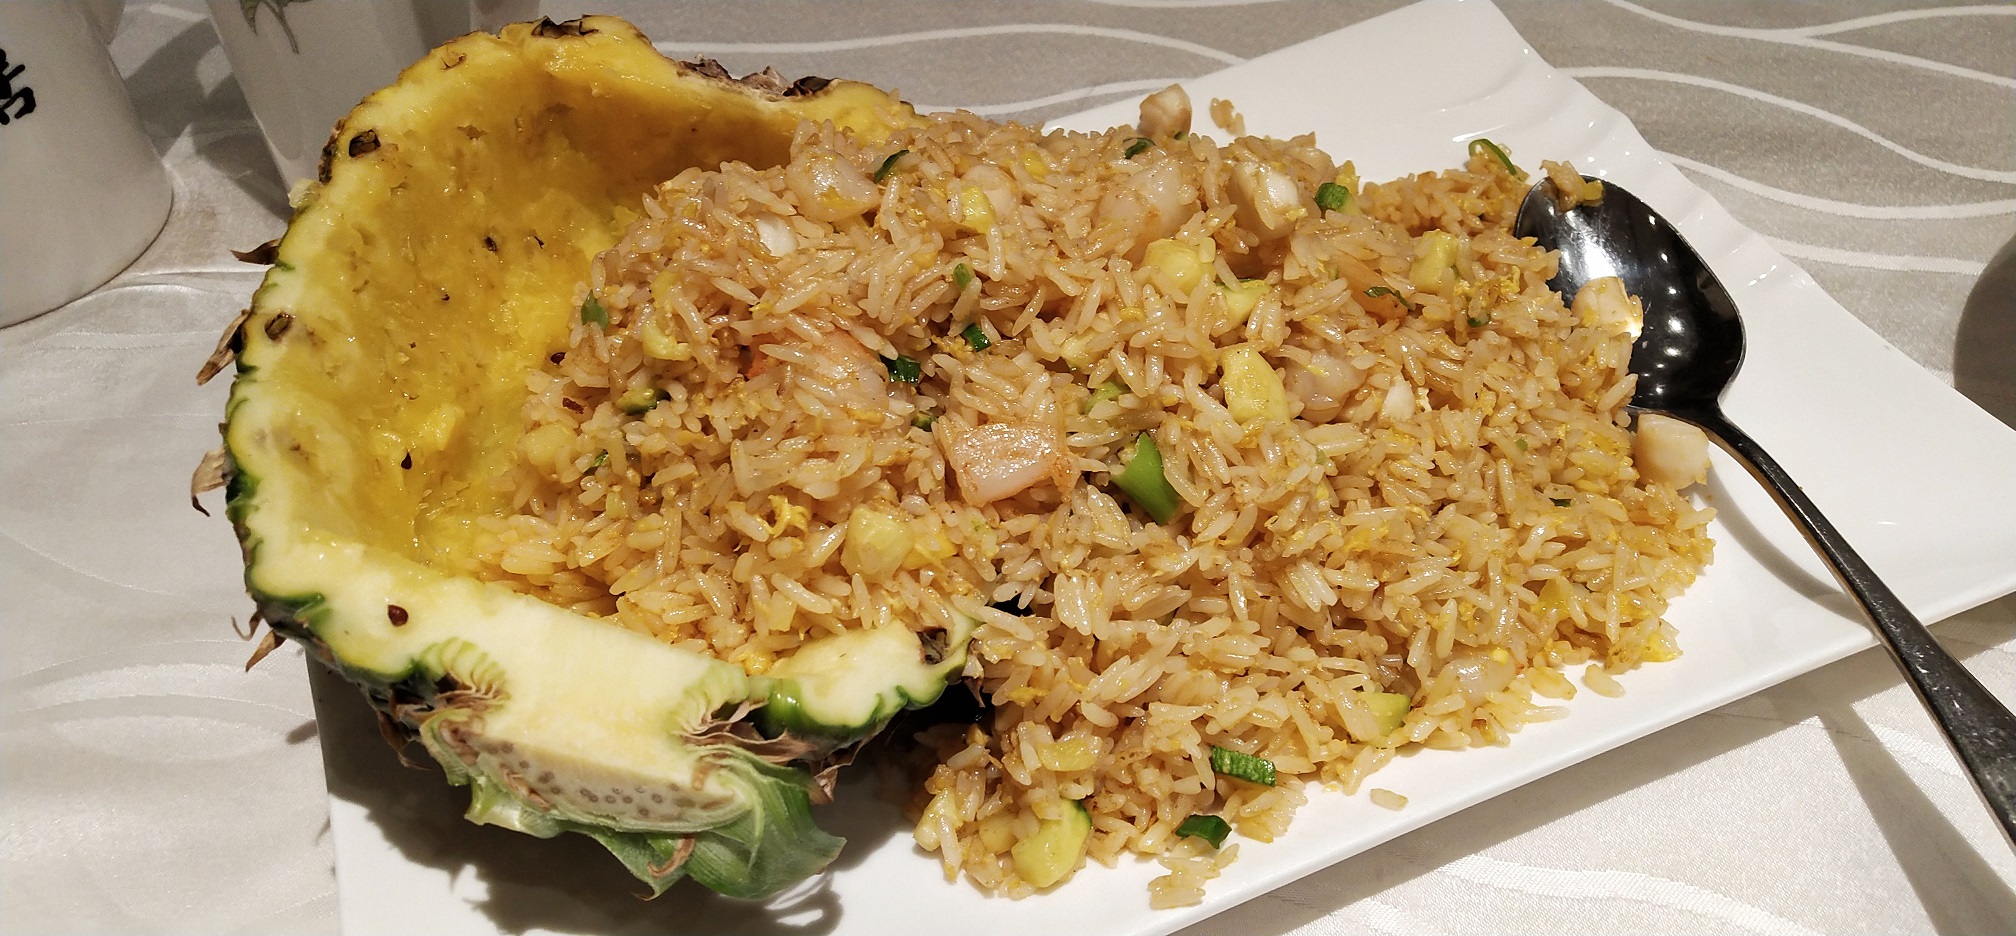 yellow Pineapple fried rice with seafood